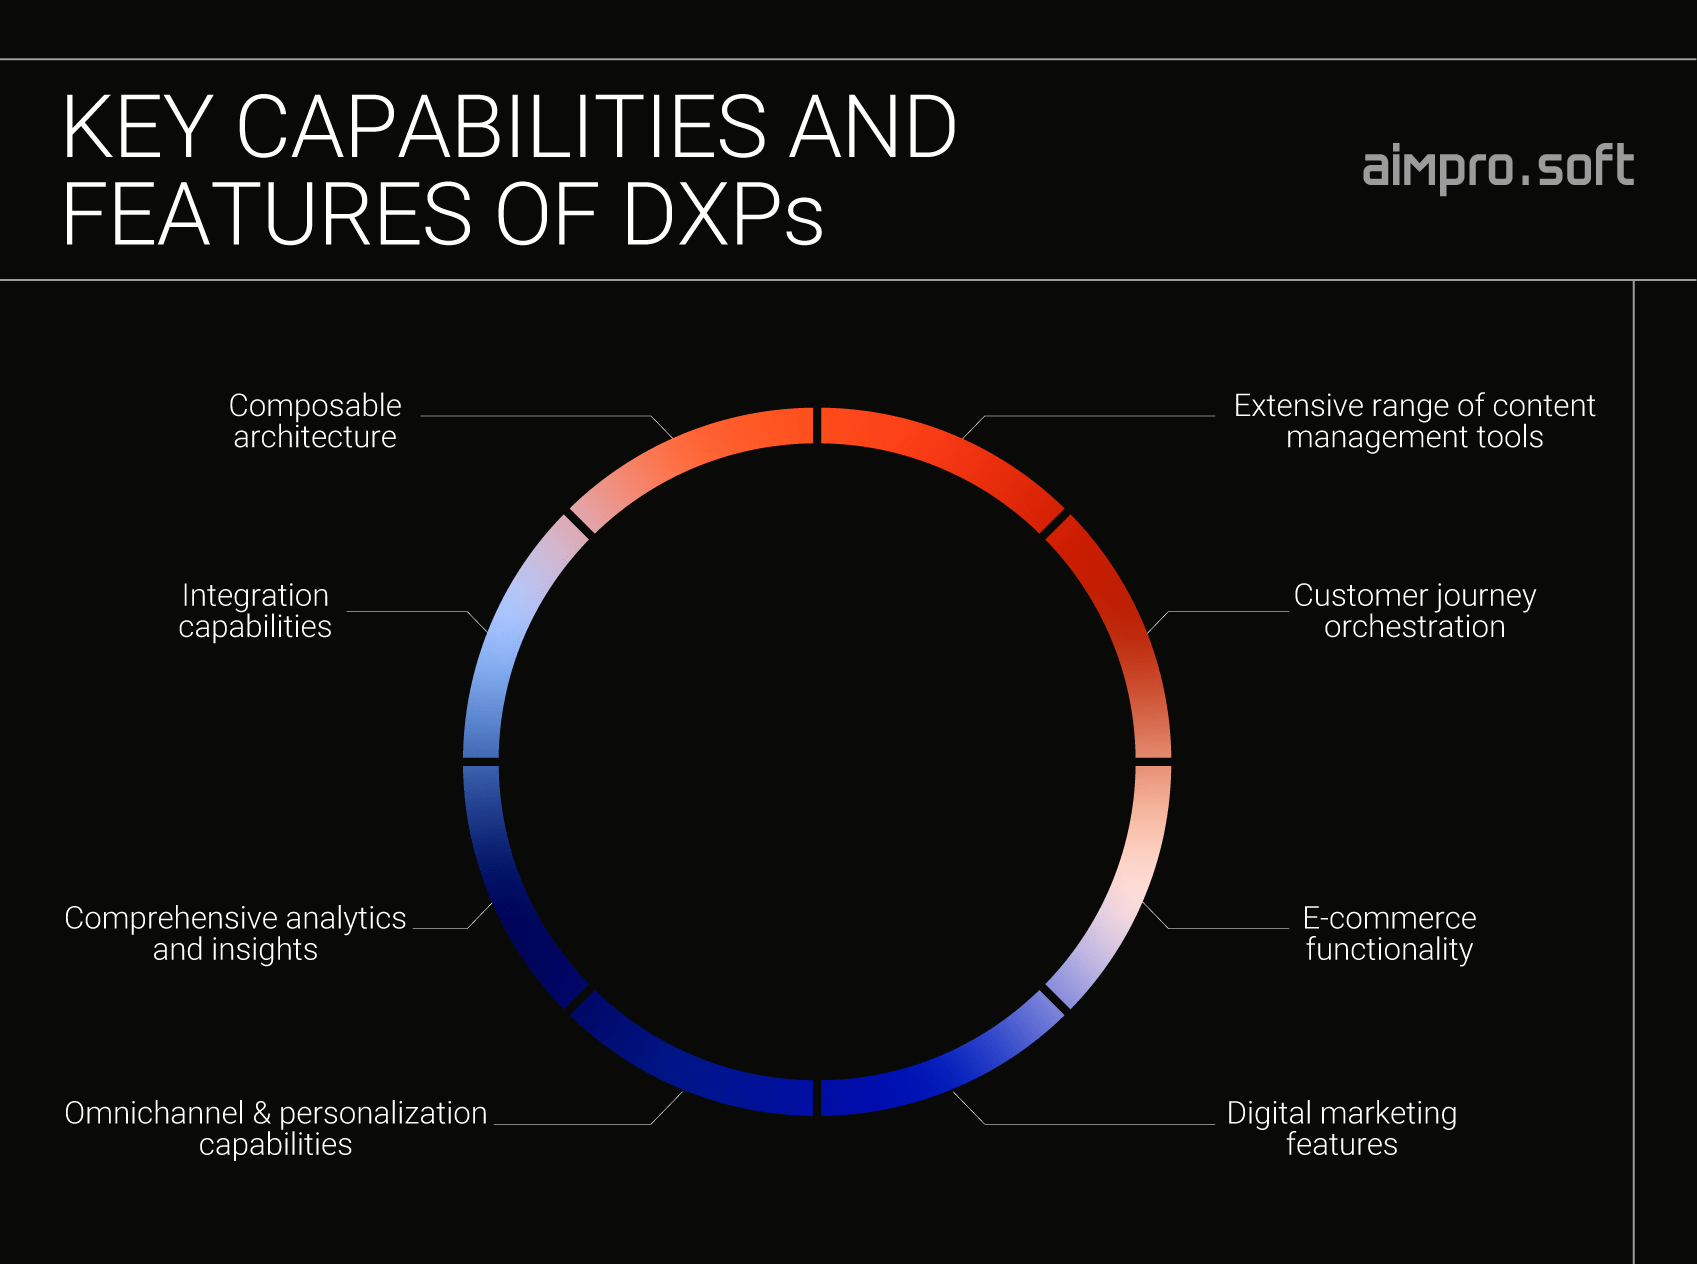 Features and capabilities of DXP platforms